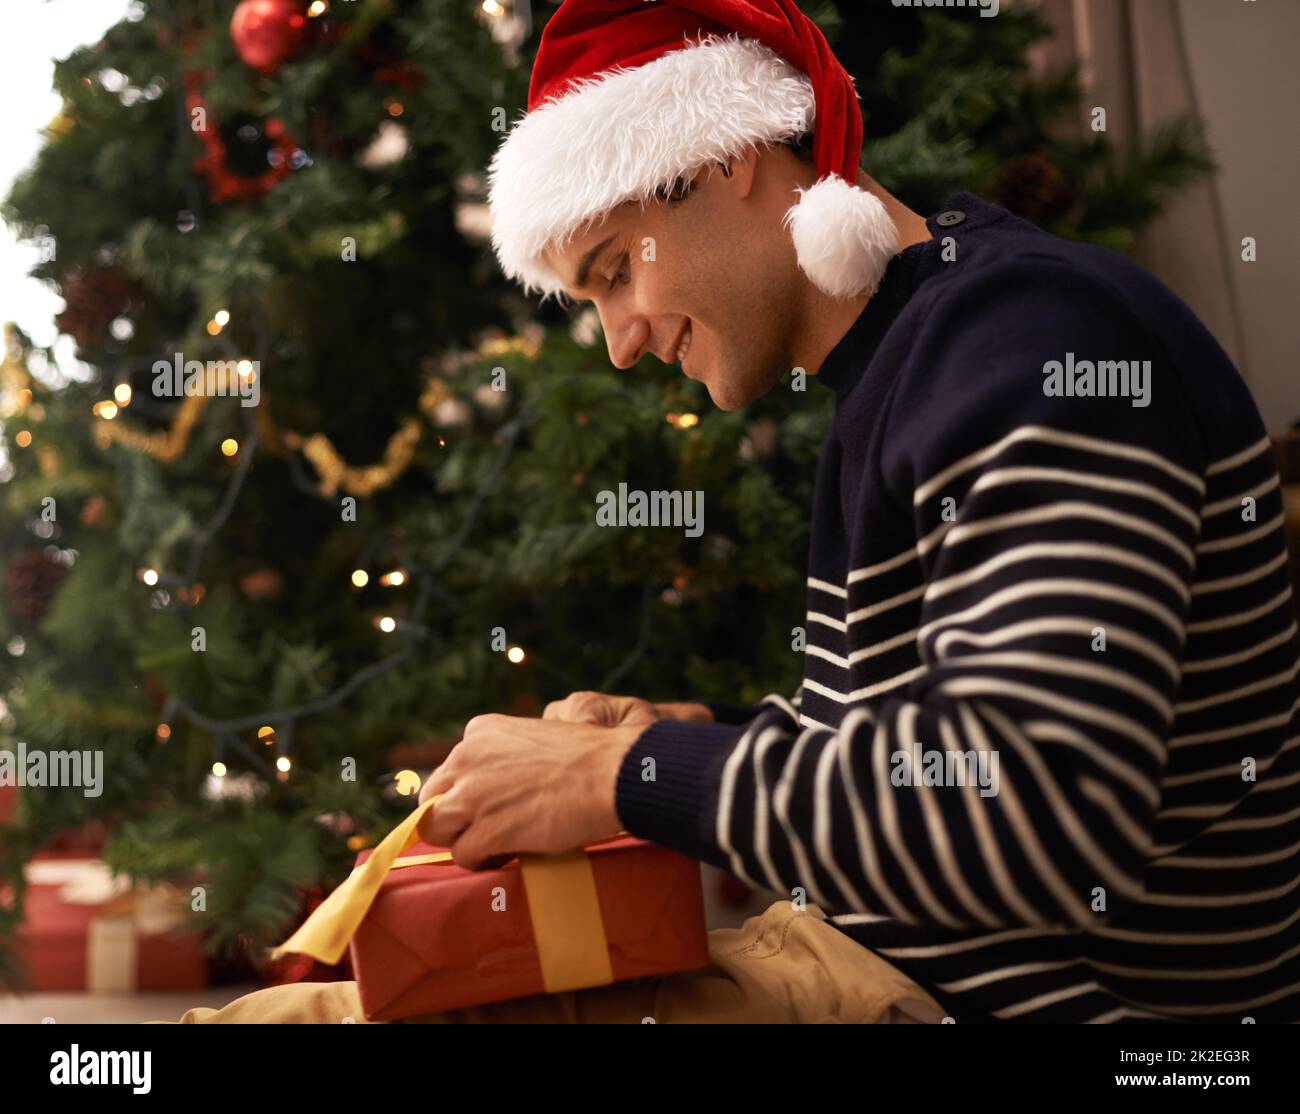 Spreading the Christmas spirit. Shot of a handsome young man getting ready for Christmas. Stock Photo